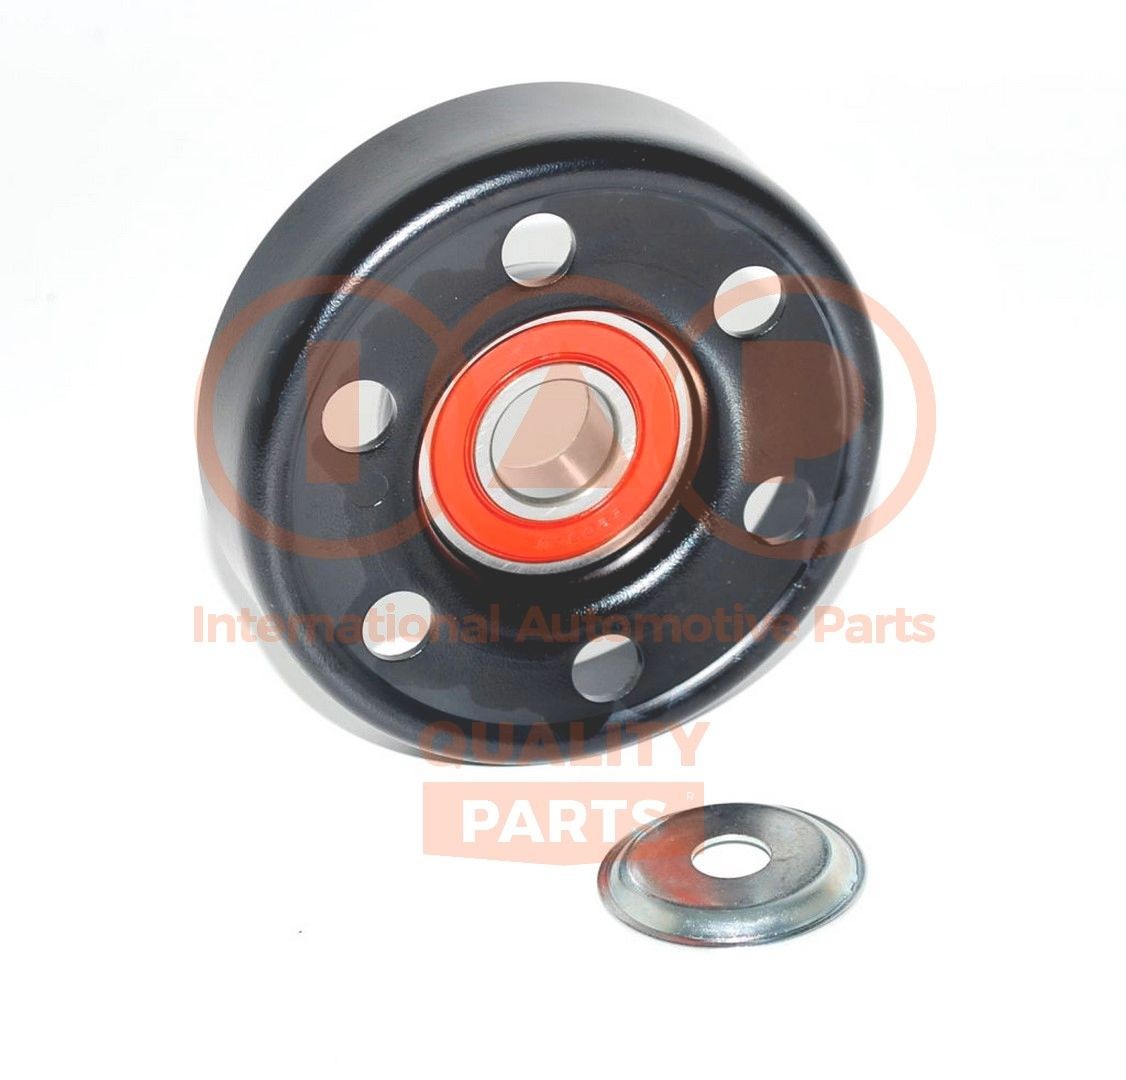 IAP QUALITY PARTS 127-17177 Deflection / Guide Pulley, v-ribbed belt